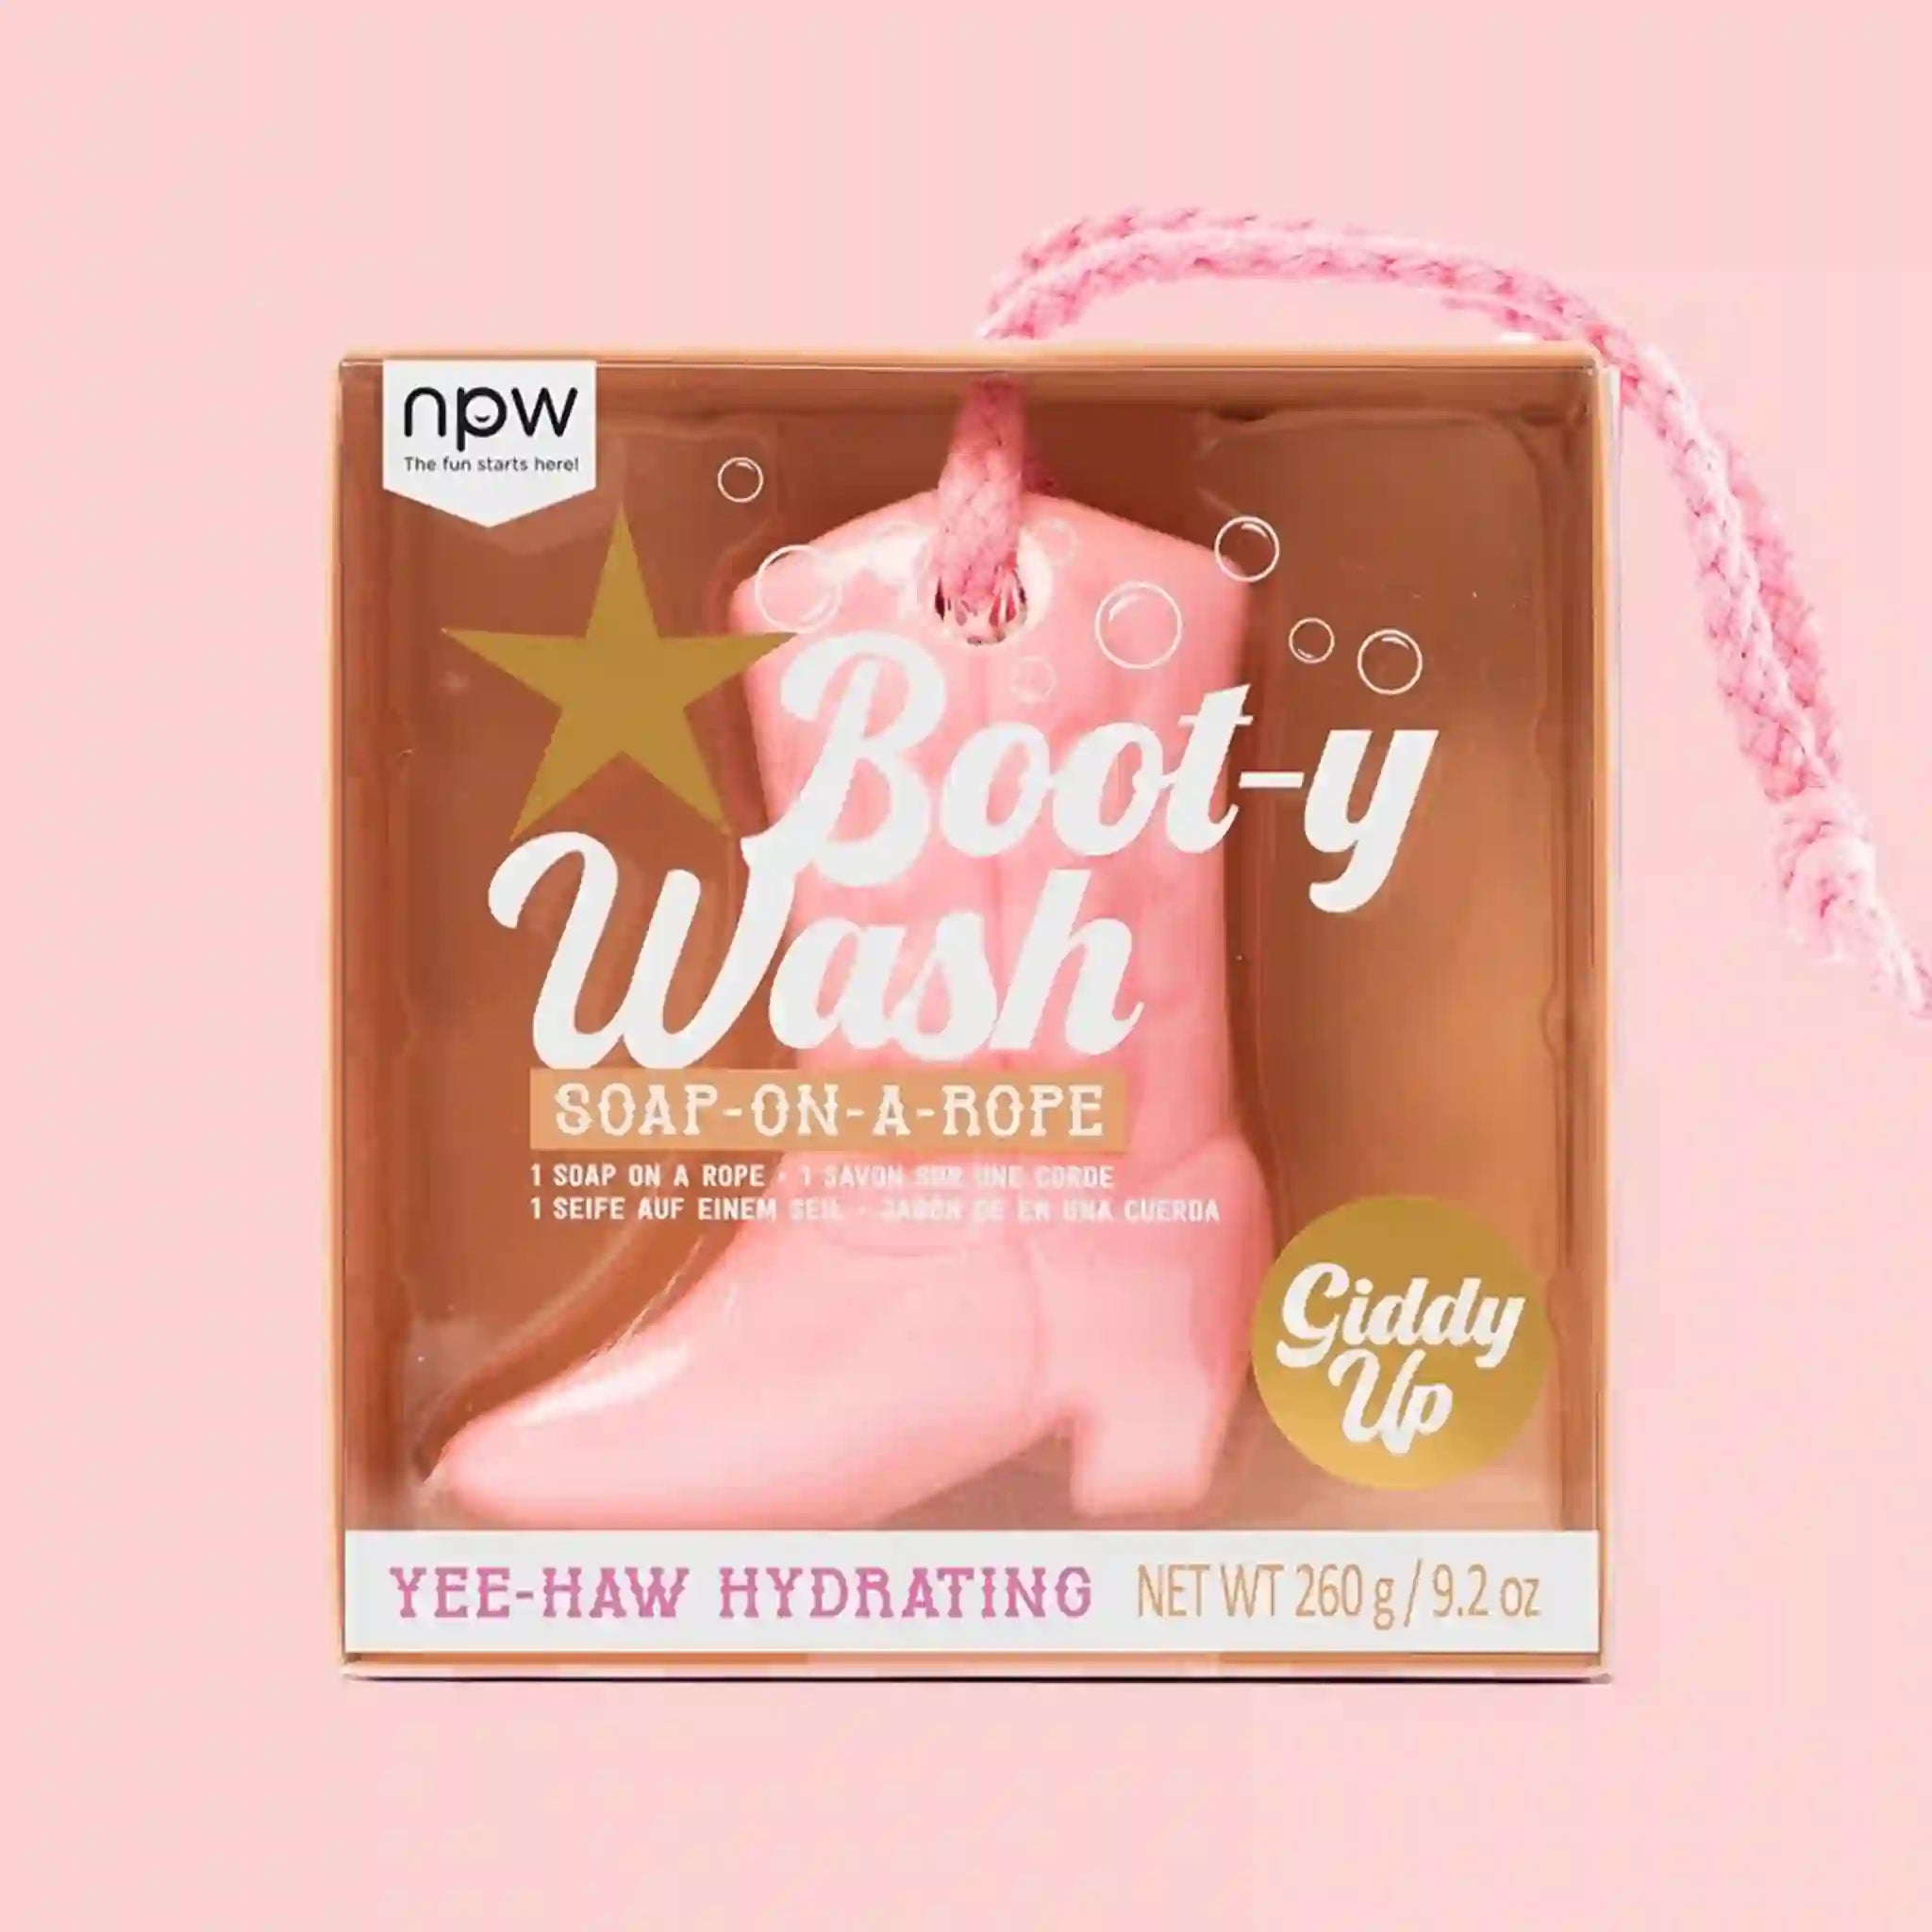 On a pink background is a pink boot shaped soap in a cardboard container.